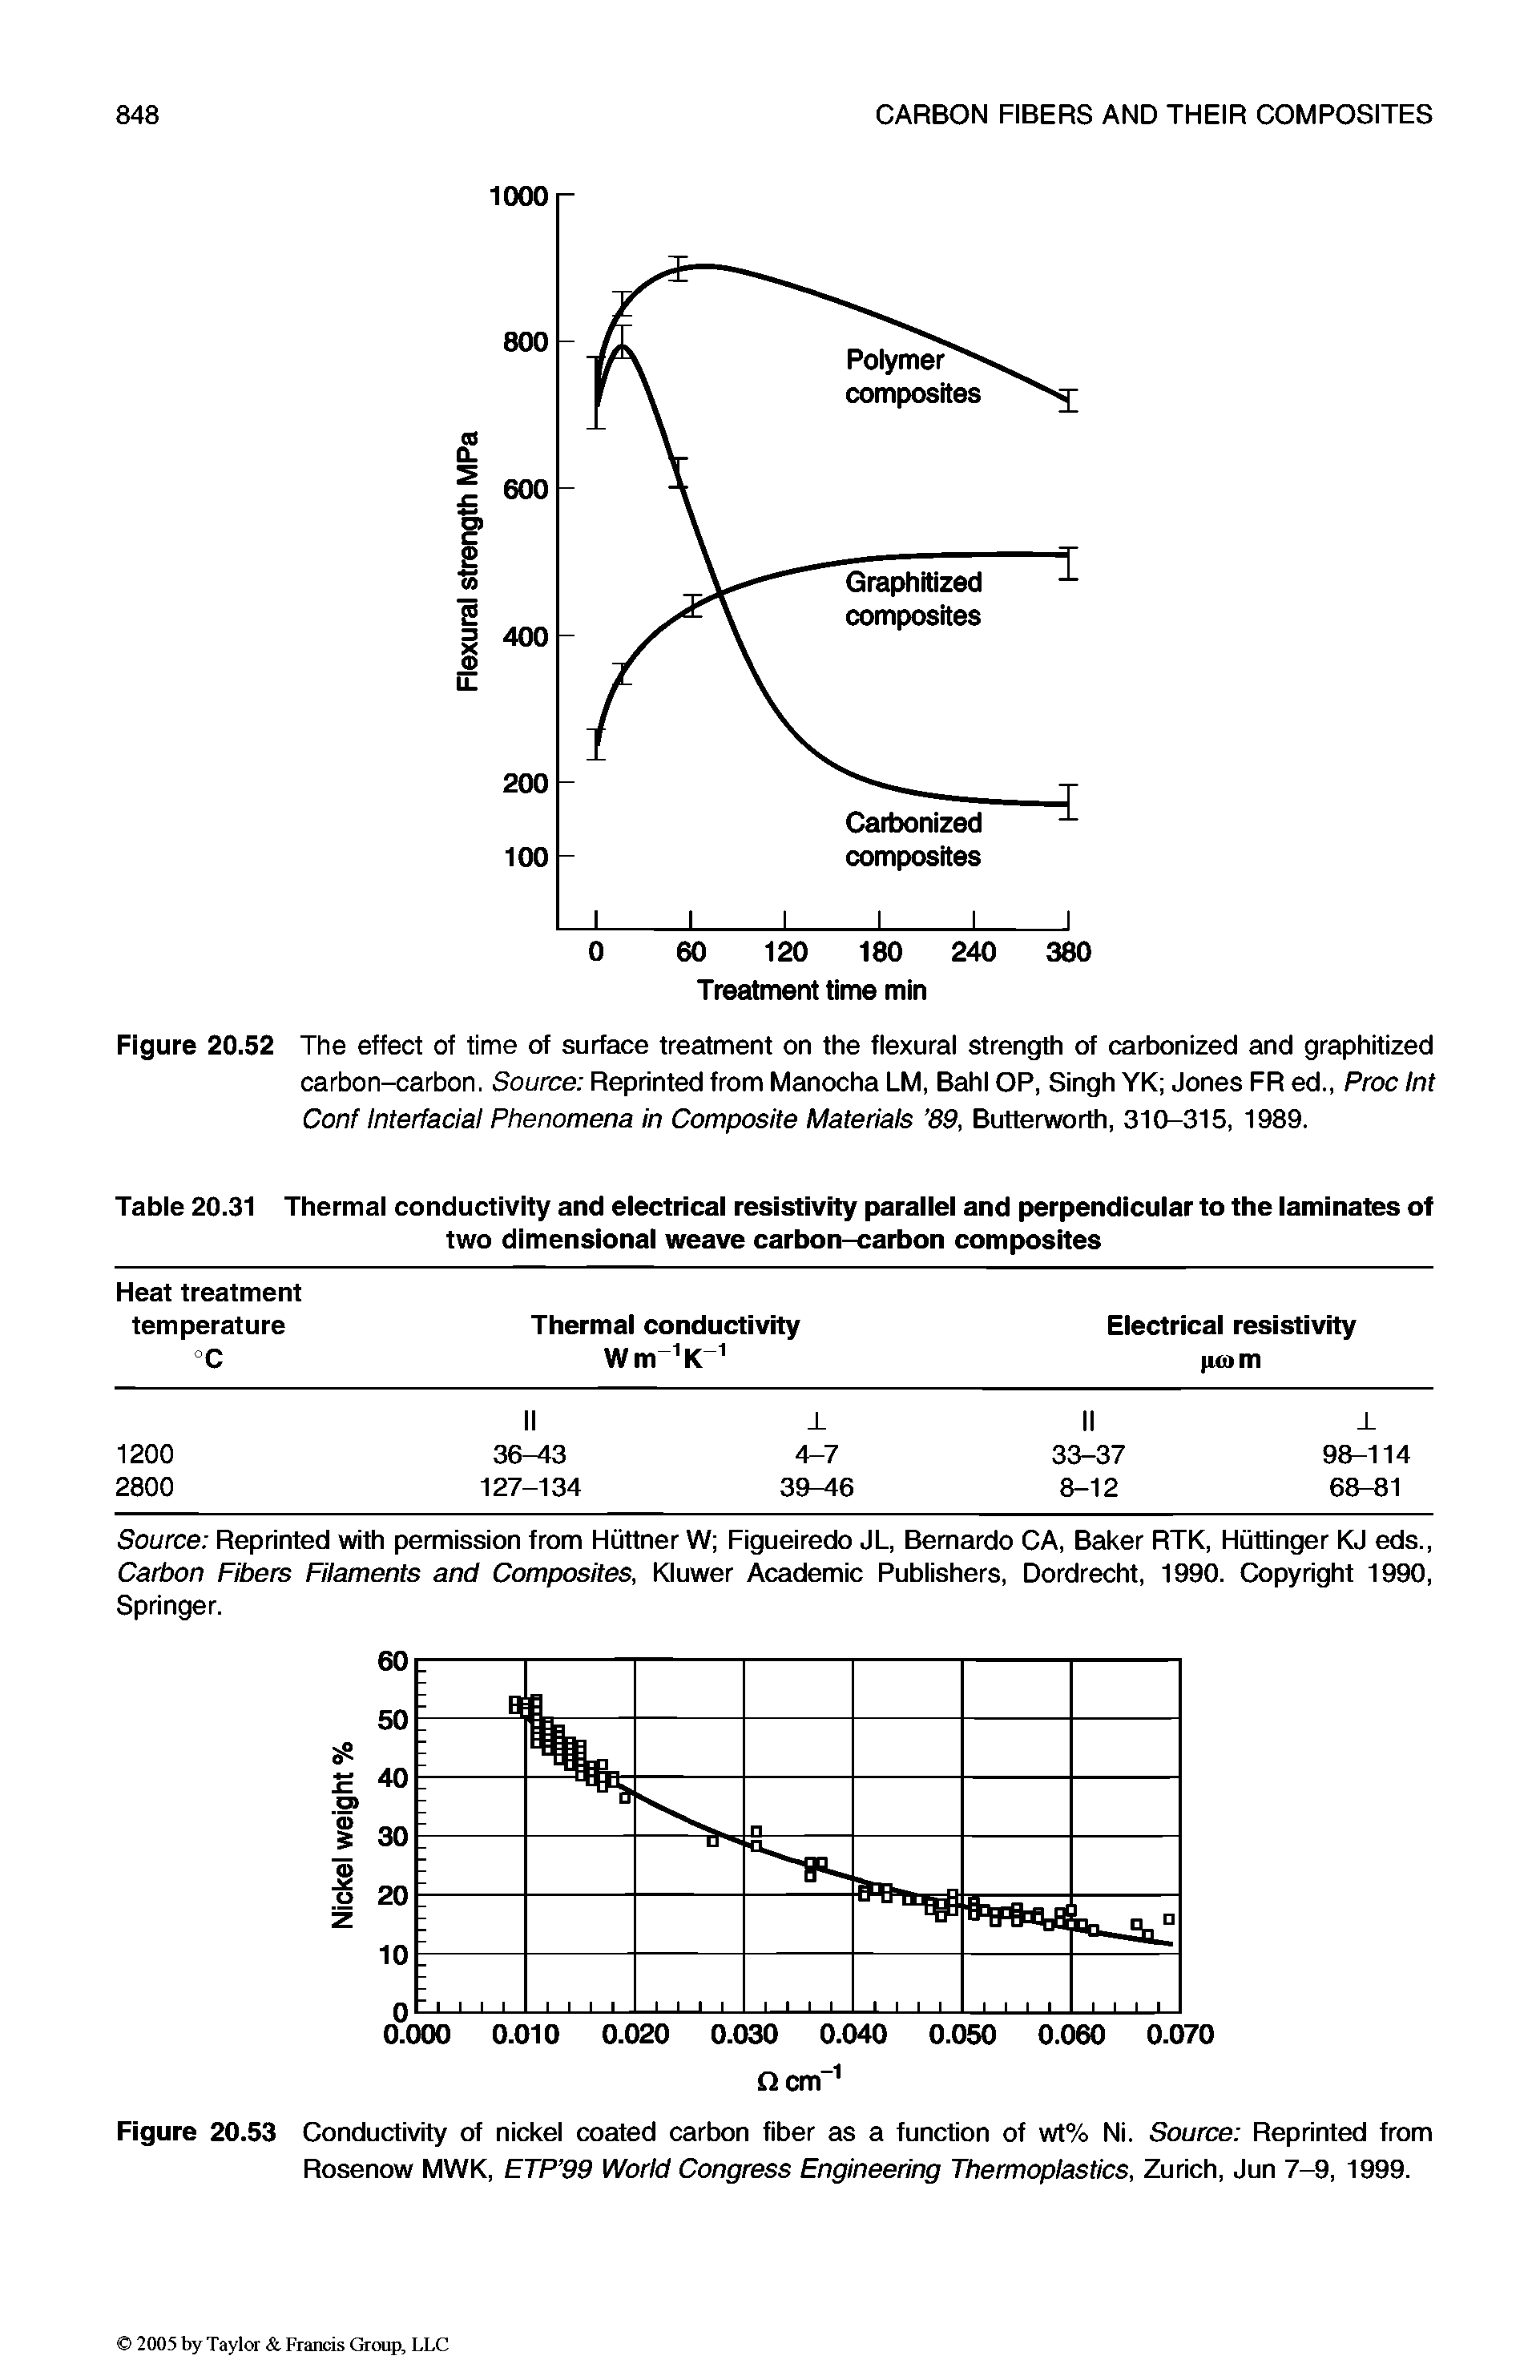 Figure 20.53 Conductivity of nickel coated carbon fiber as a function of wt% Ni. Source Reprinted from Rosenow MWK, ETP 99 World Congress Engineering Thermoplastics, Zurich, Jun 7-9, 1999.